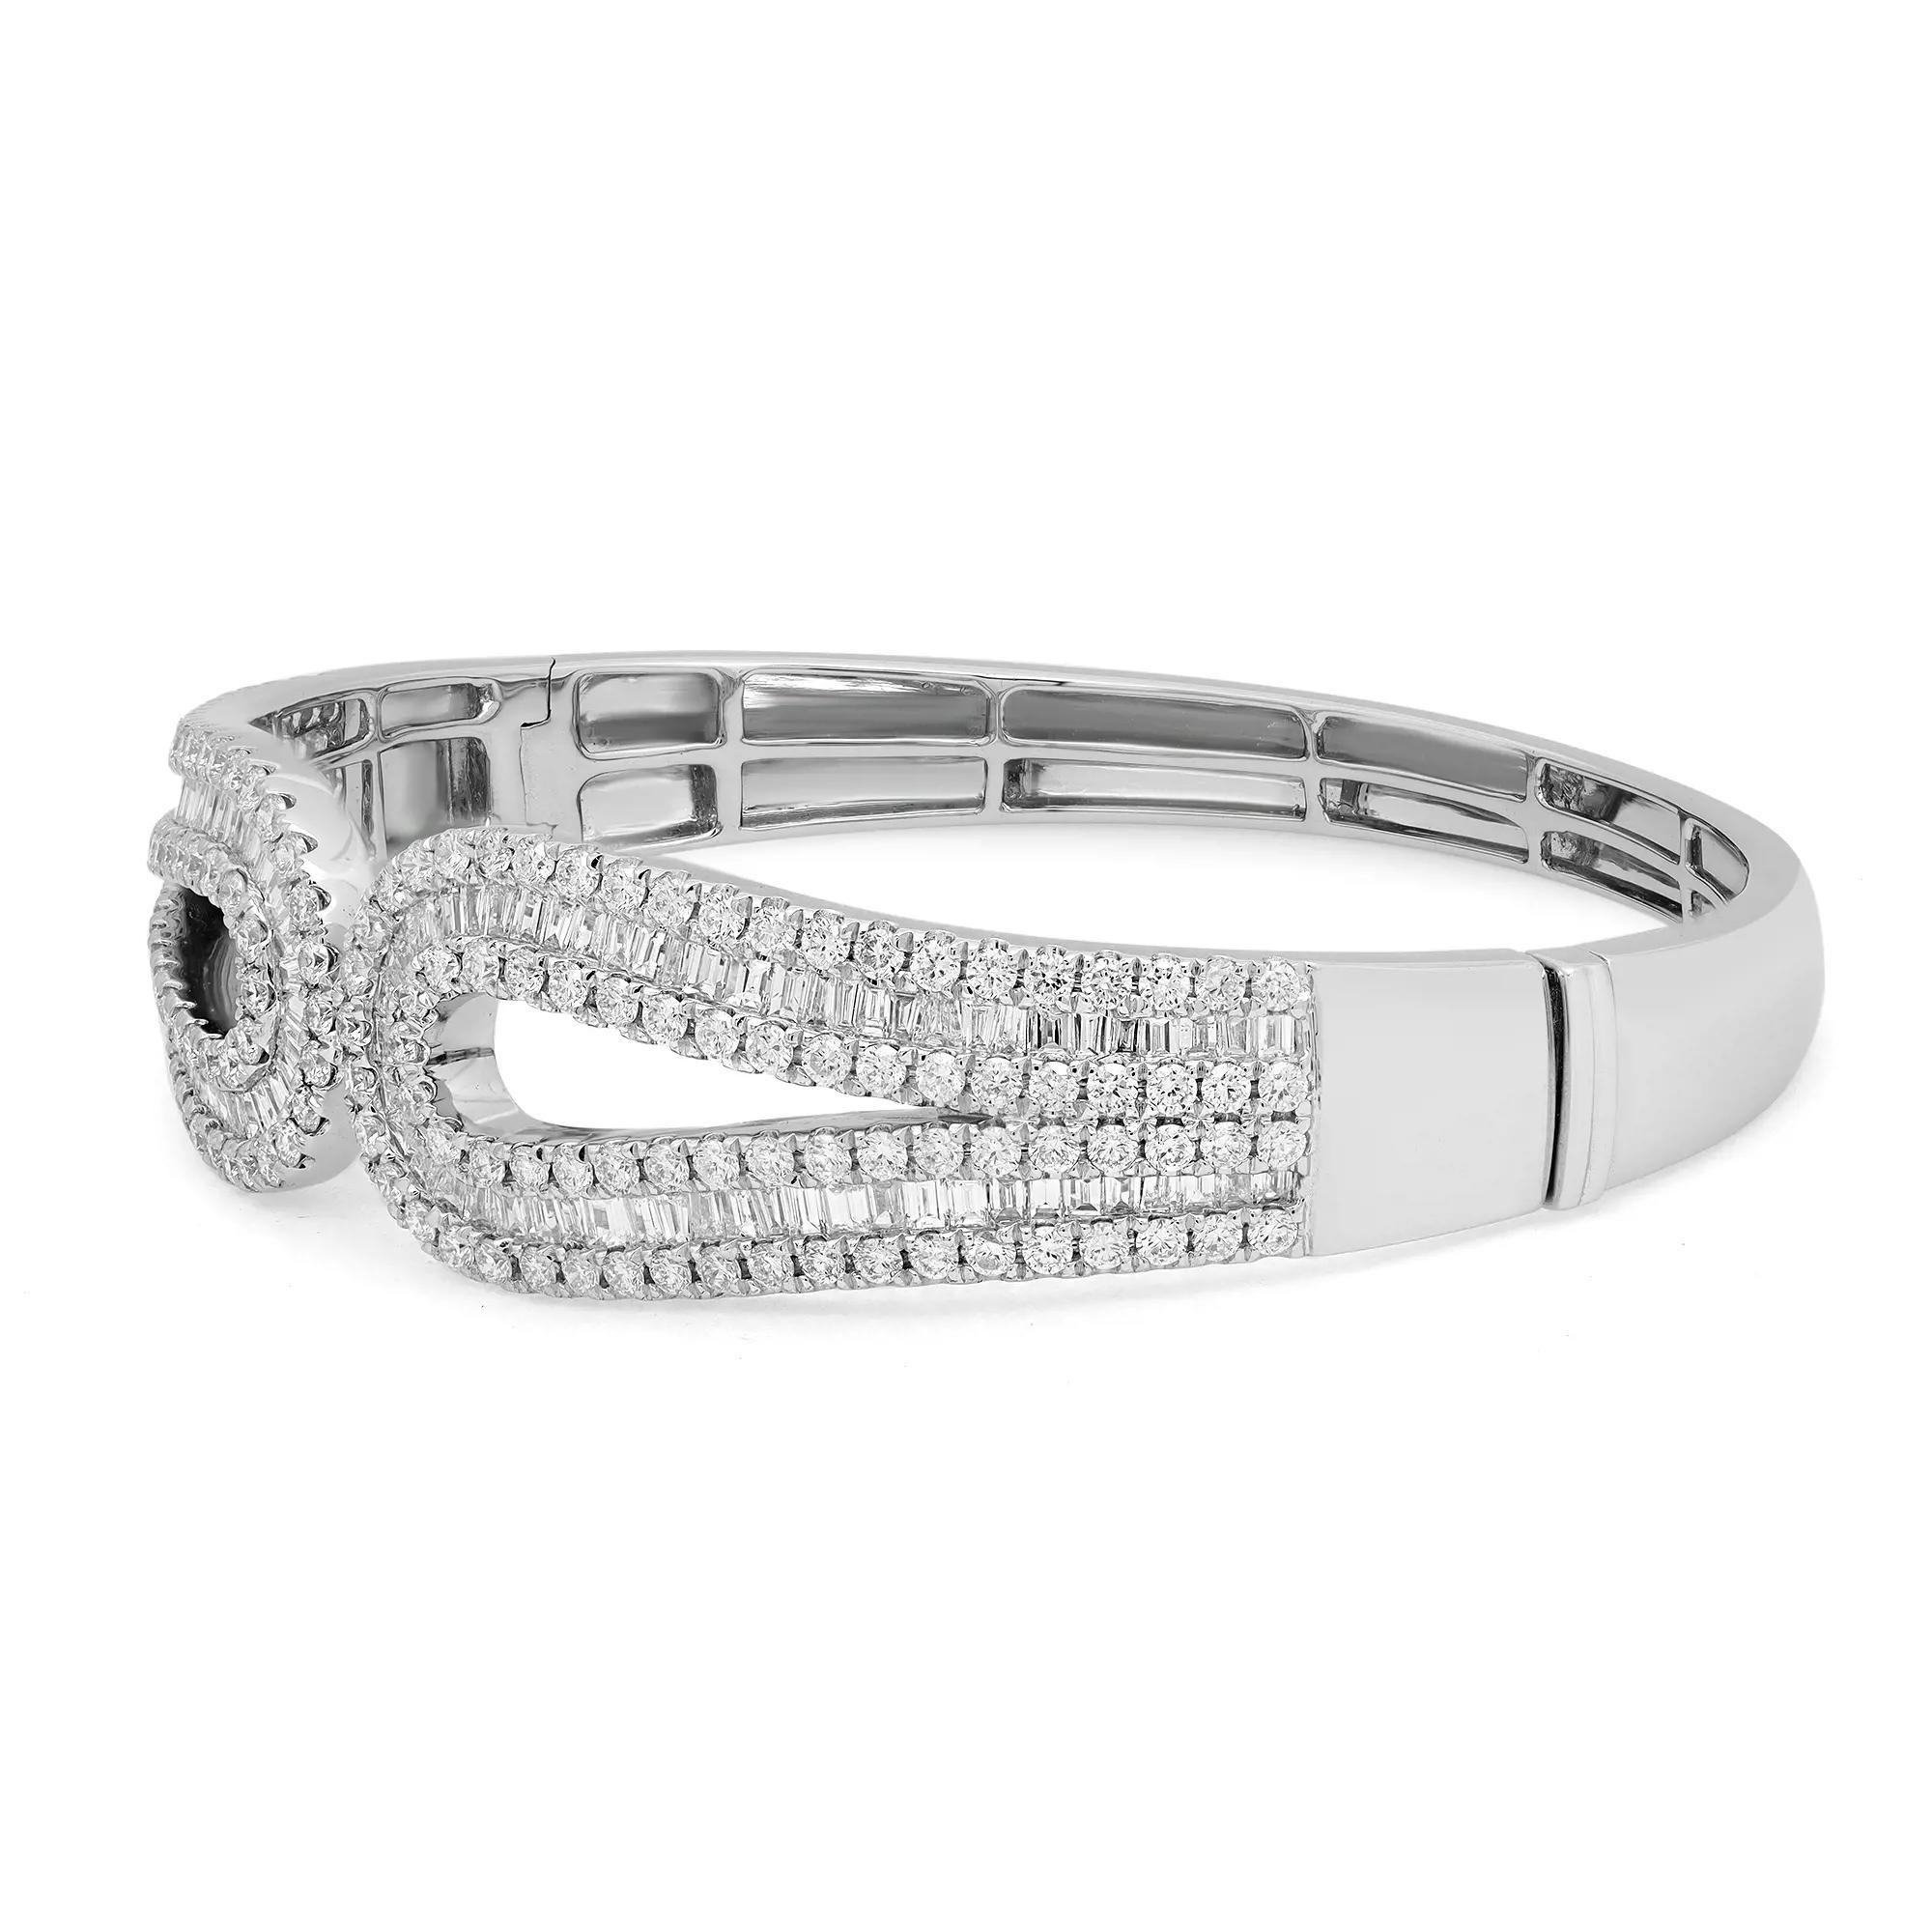 This beautifully crafted bangle bracelet features channel set baguette cut diamonds with an outline of prong set round brilliant cut diamonds. Crafted in 18K white gold. Total diamond weight: 4.63 carats. Diamond Quality: G-H color and VS-SI